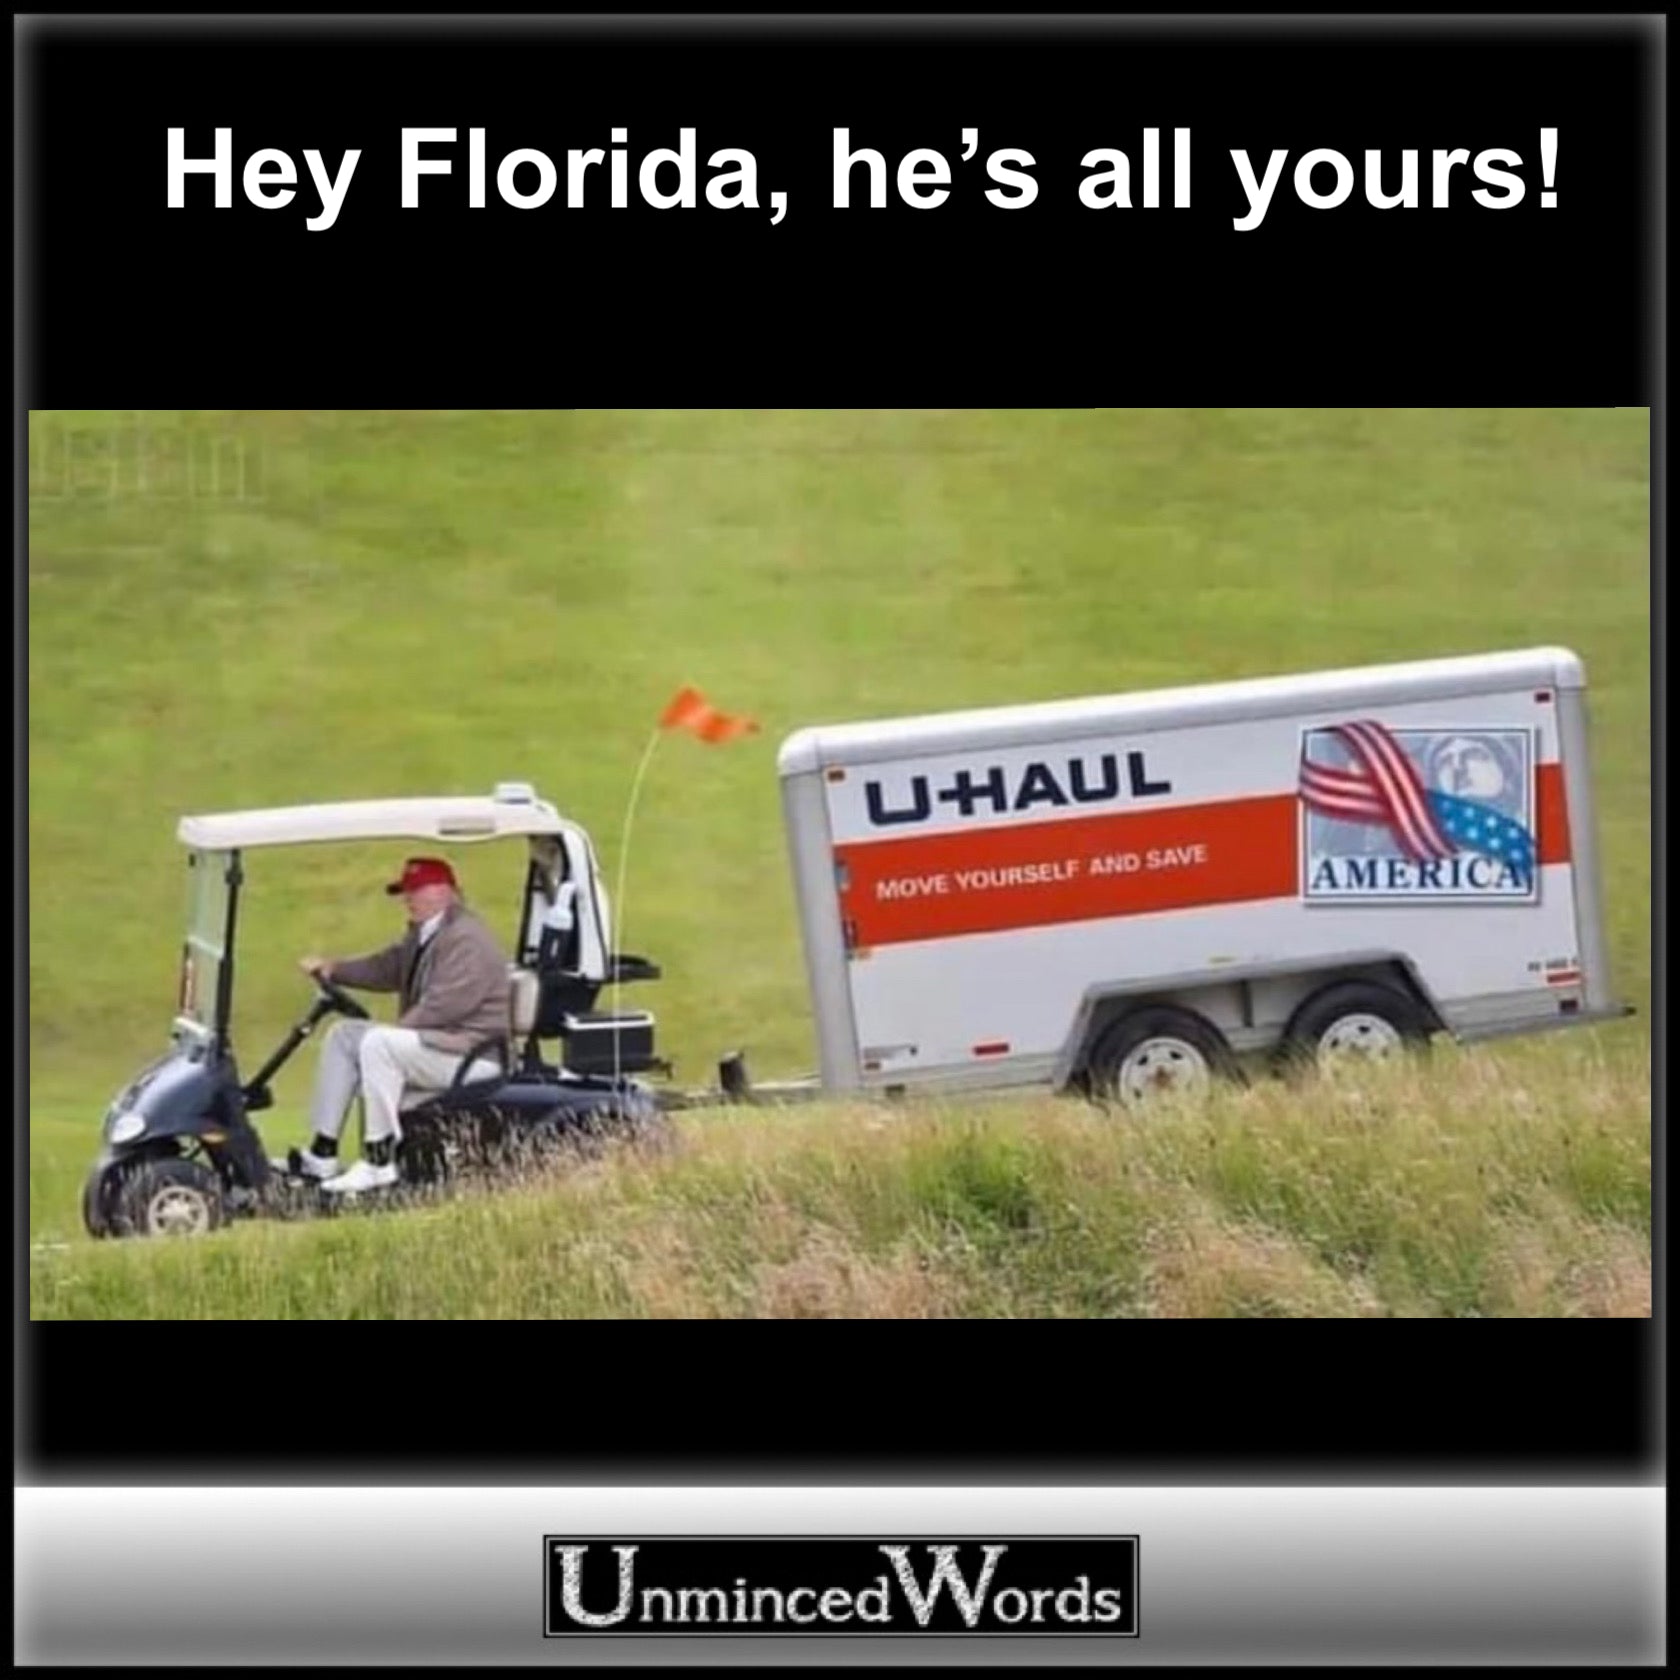 Hey Florida, he’s all yours!